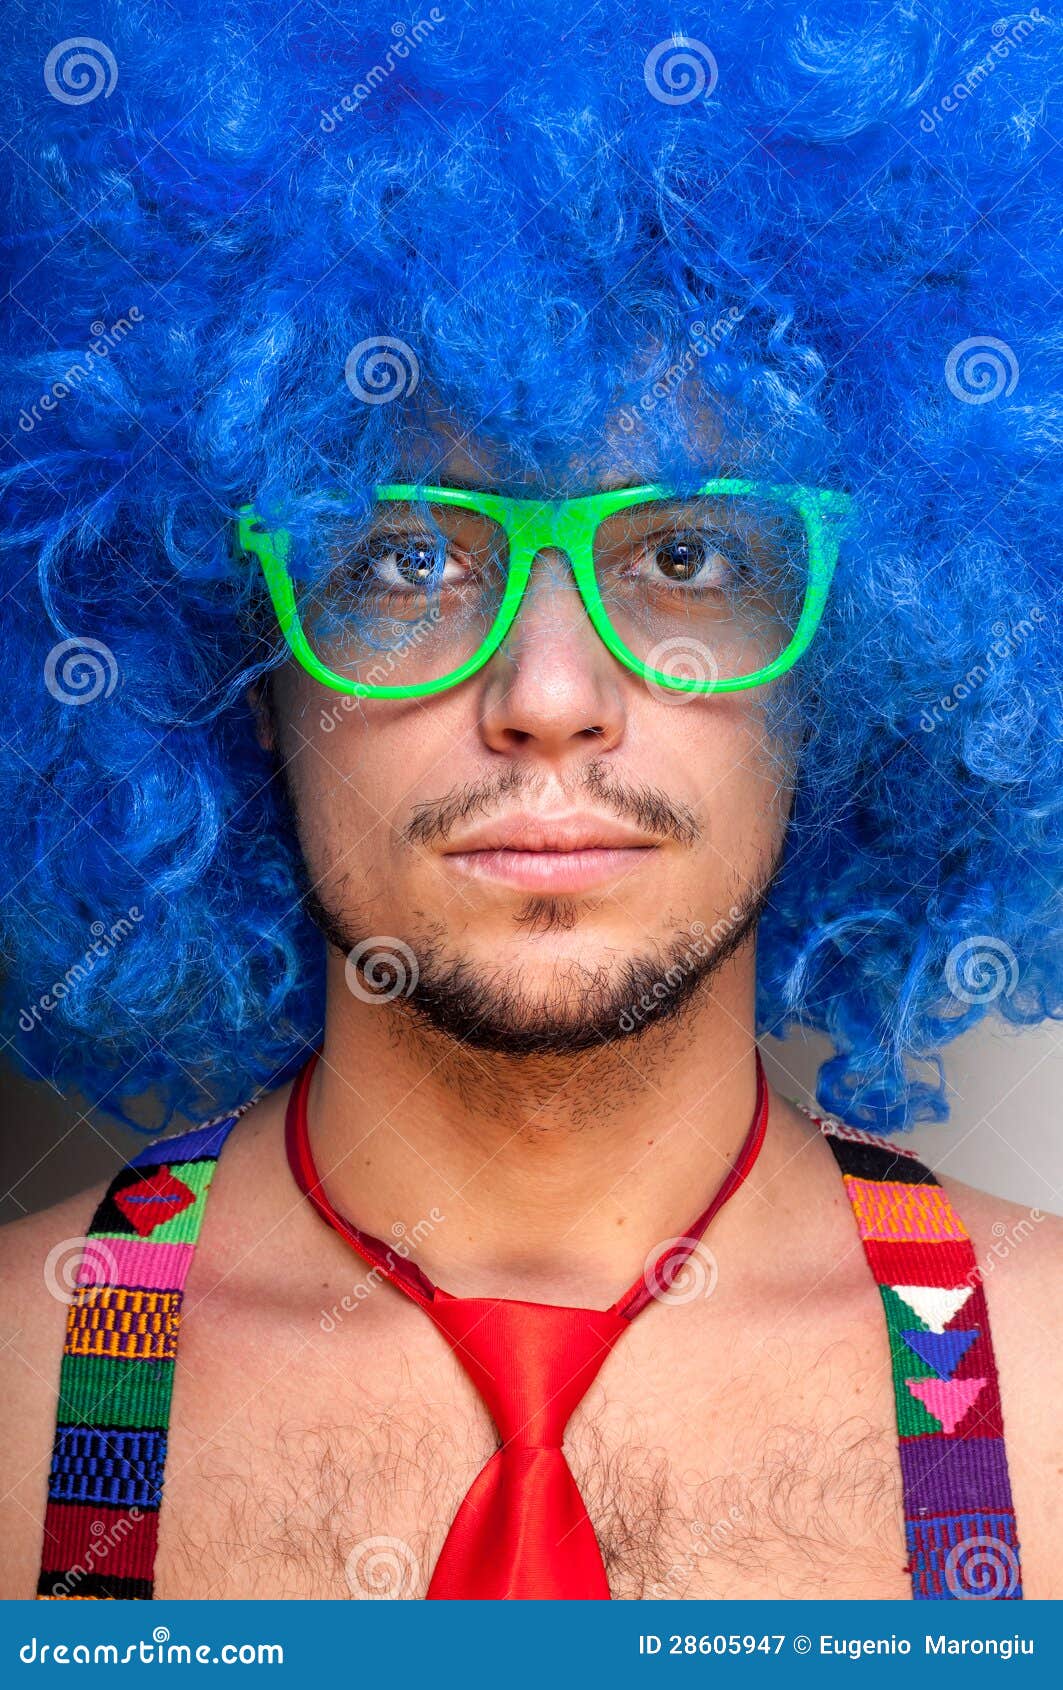 Funny Guy Naked With Blue Wig And Red Tie Royalty Free 